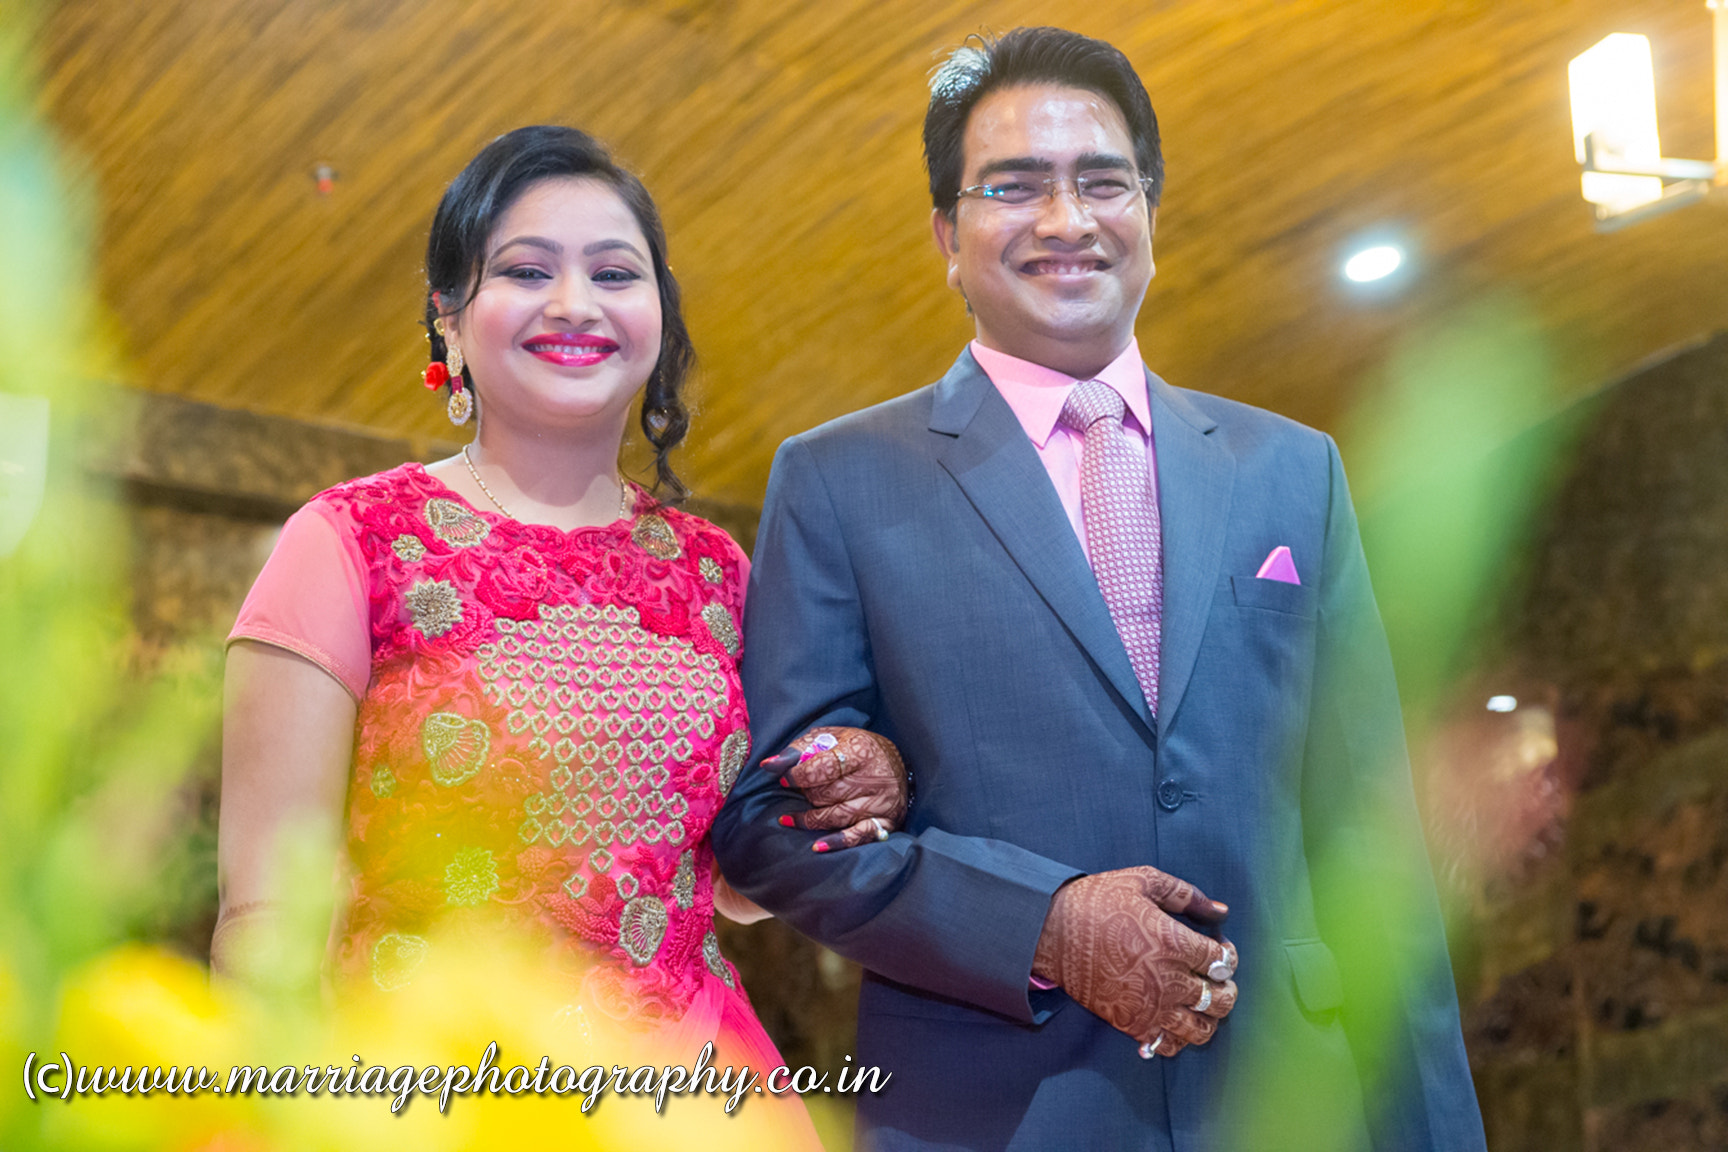 Sony a99 II sample photo. Best wedding photo quality by the best wedding photographer in kolkata photography